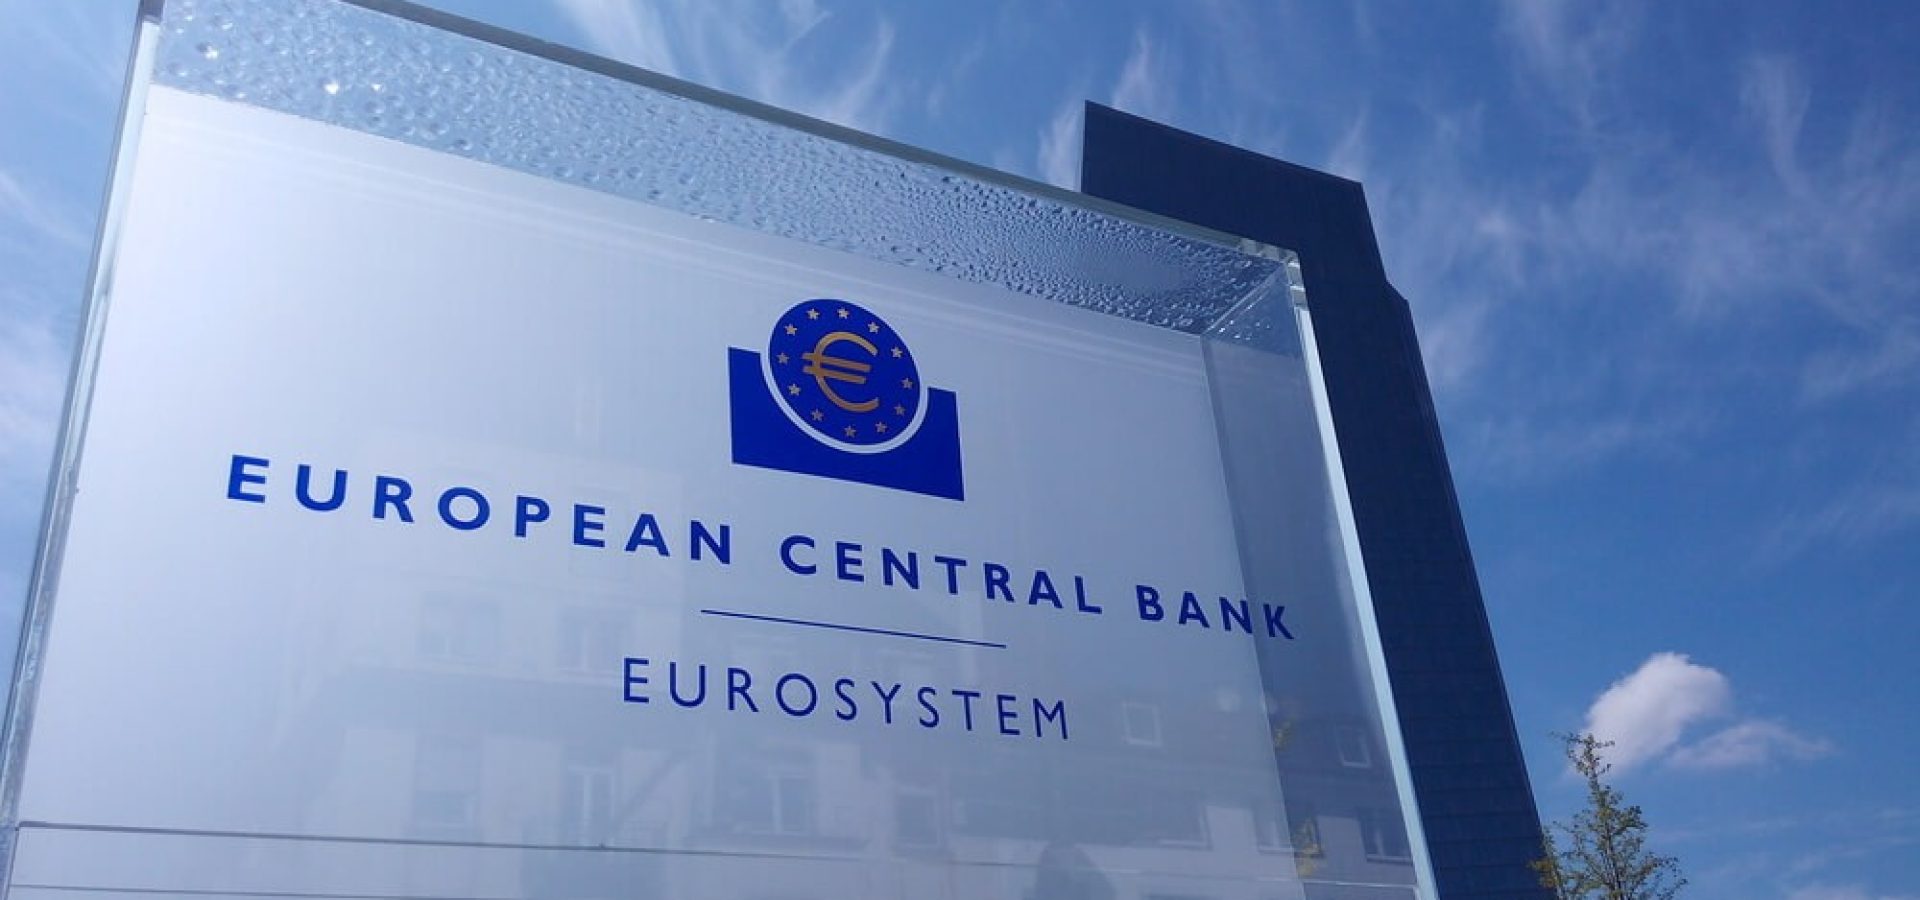 Sign of the European Central Bank with the headquarters in the background.